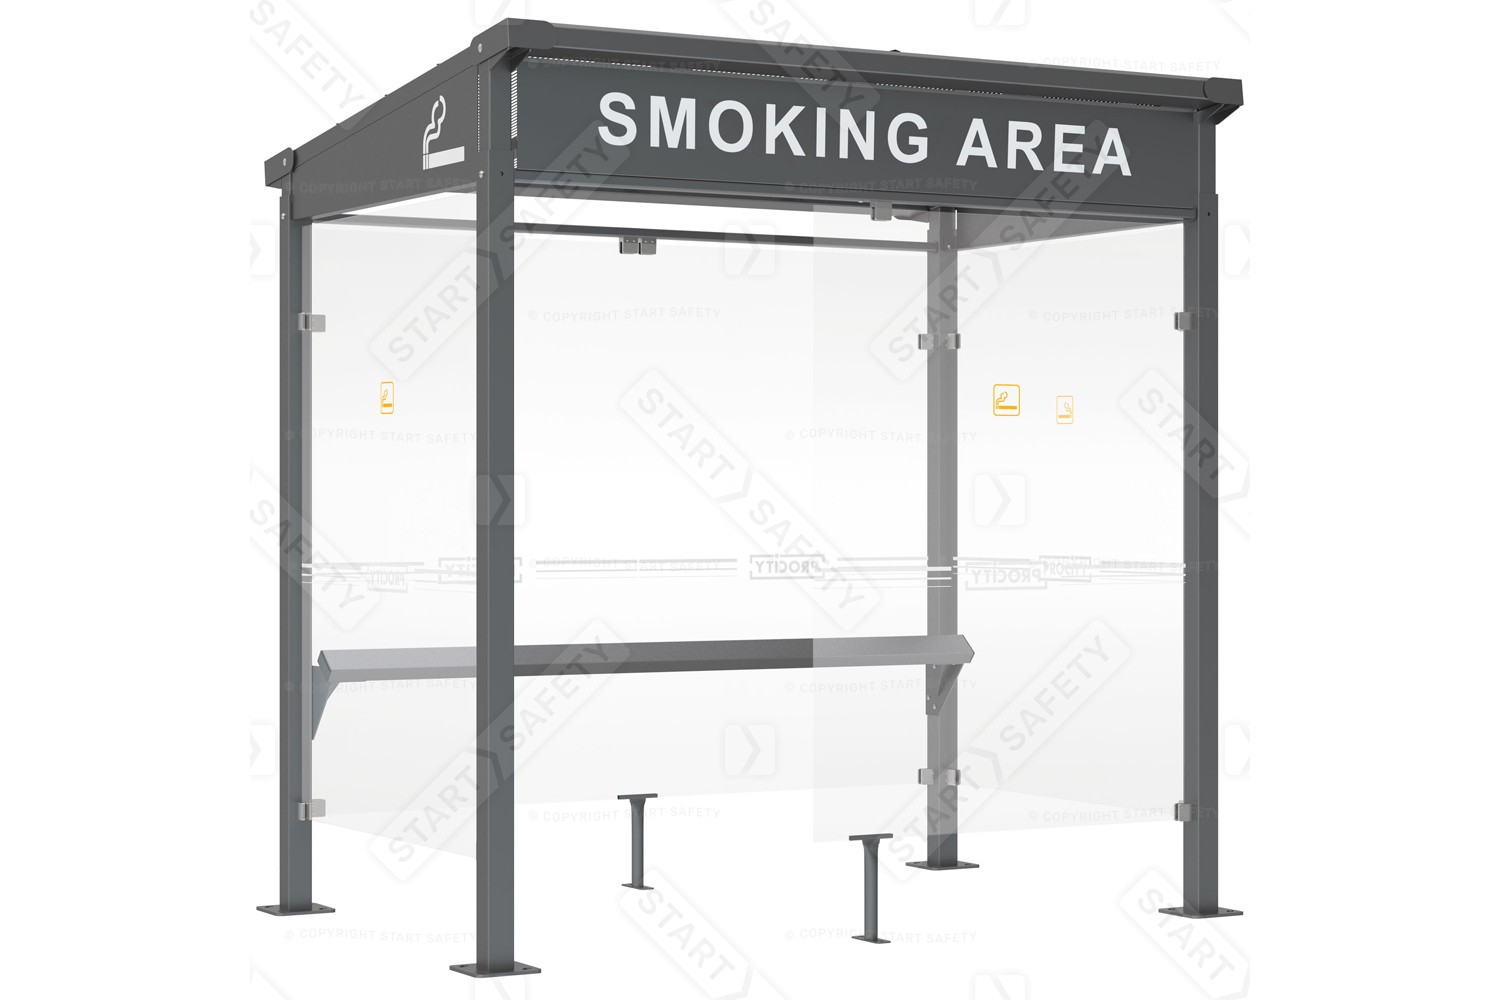 Procity Milan Smoking and Vaping Shelter With Cigarette Decals